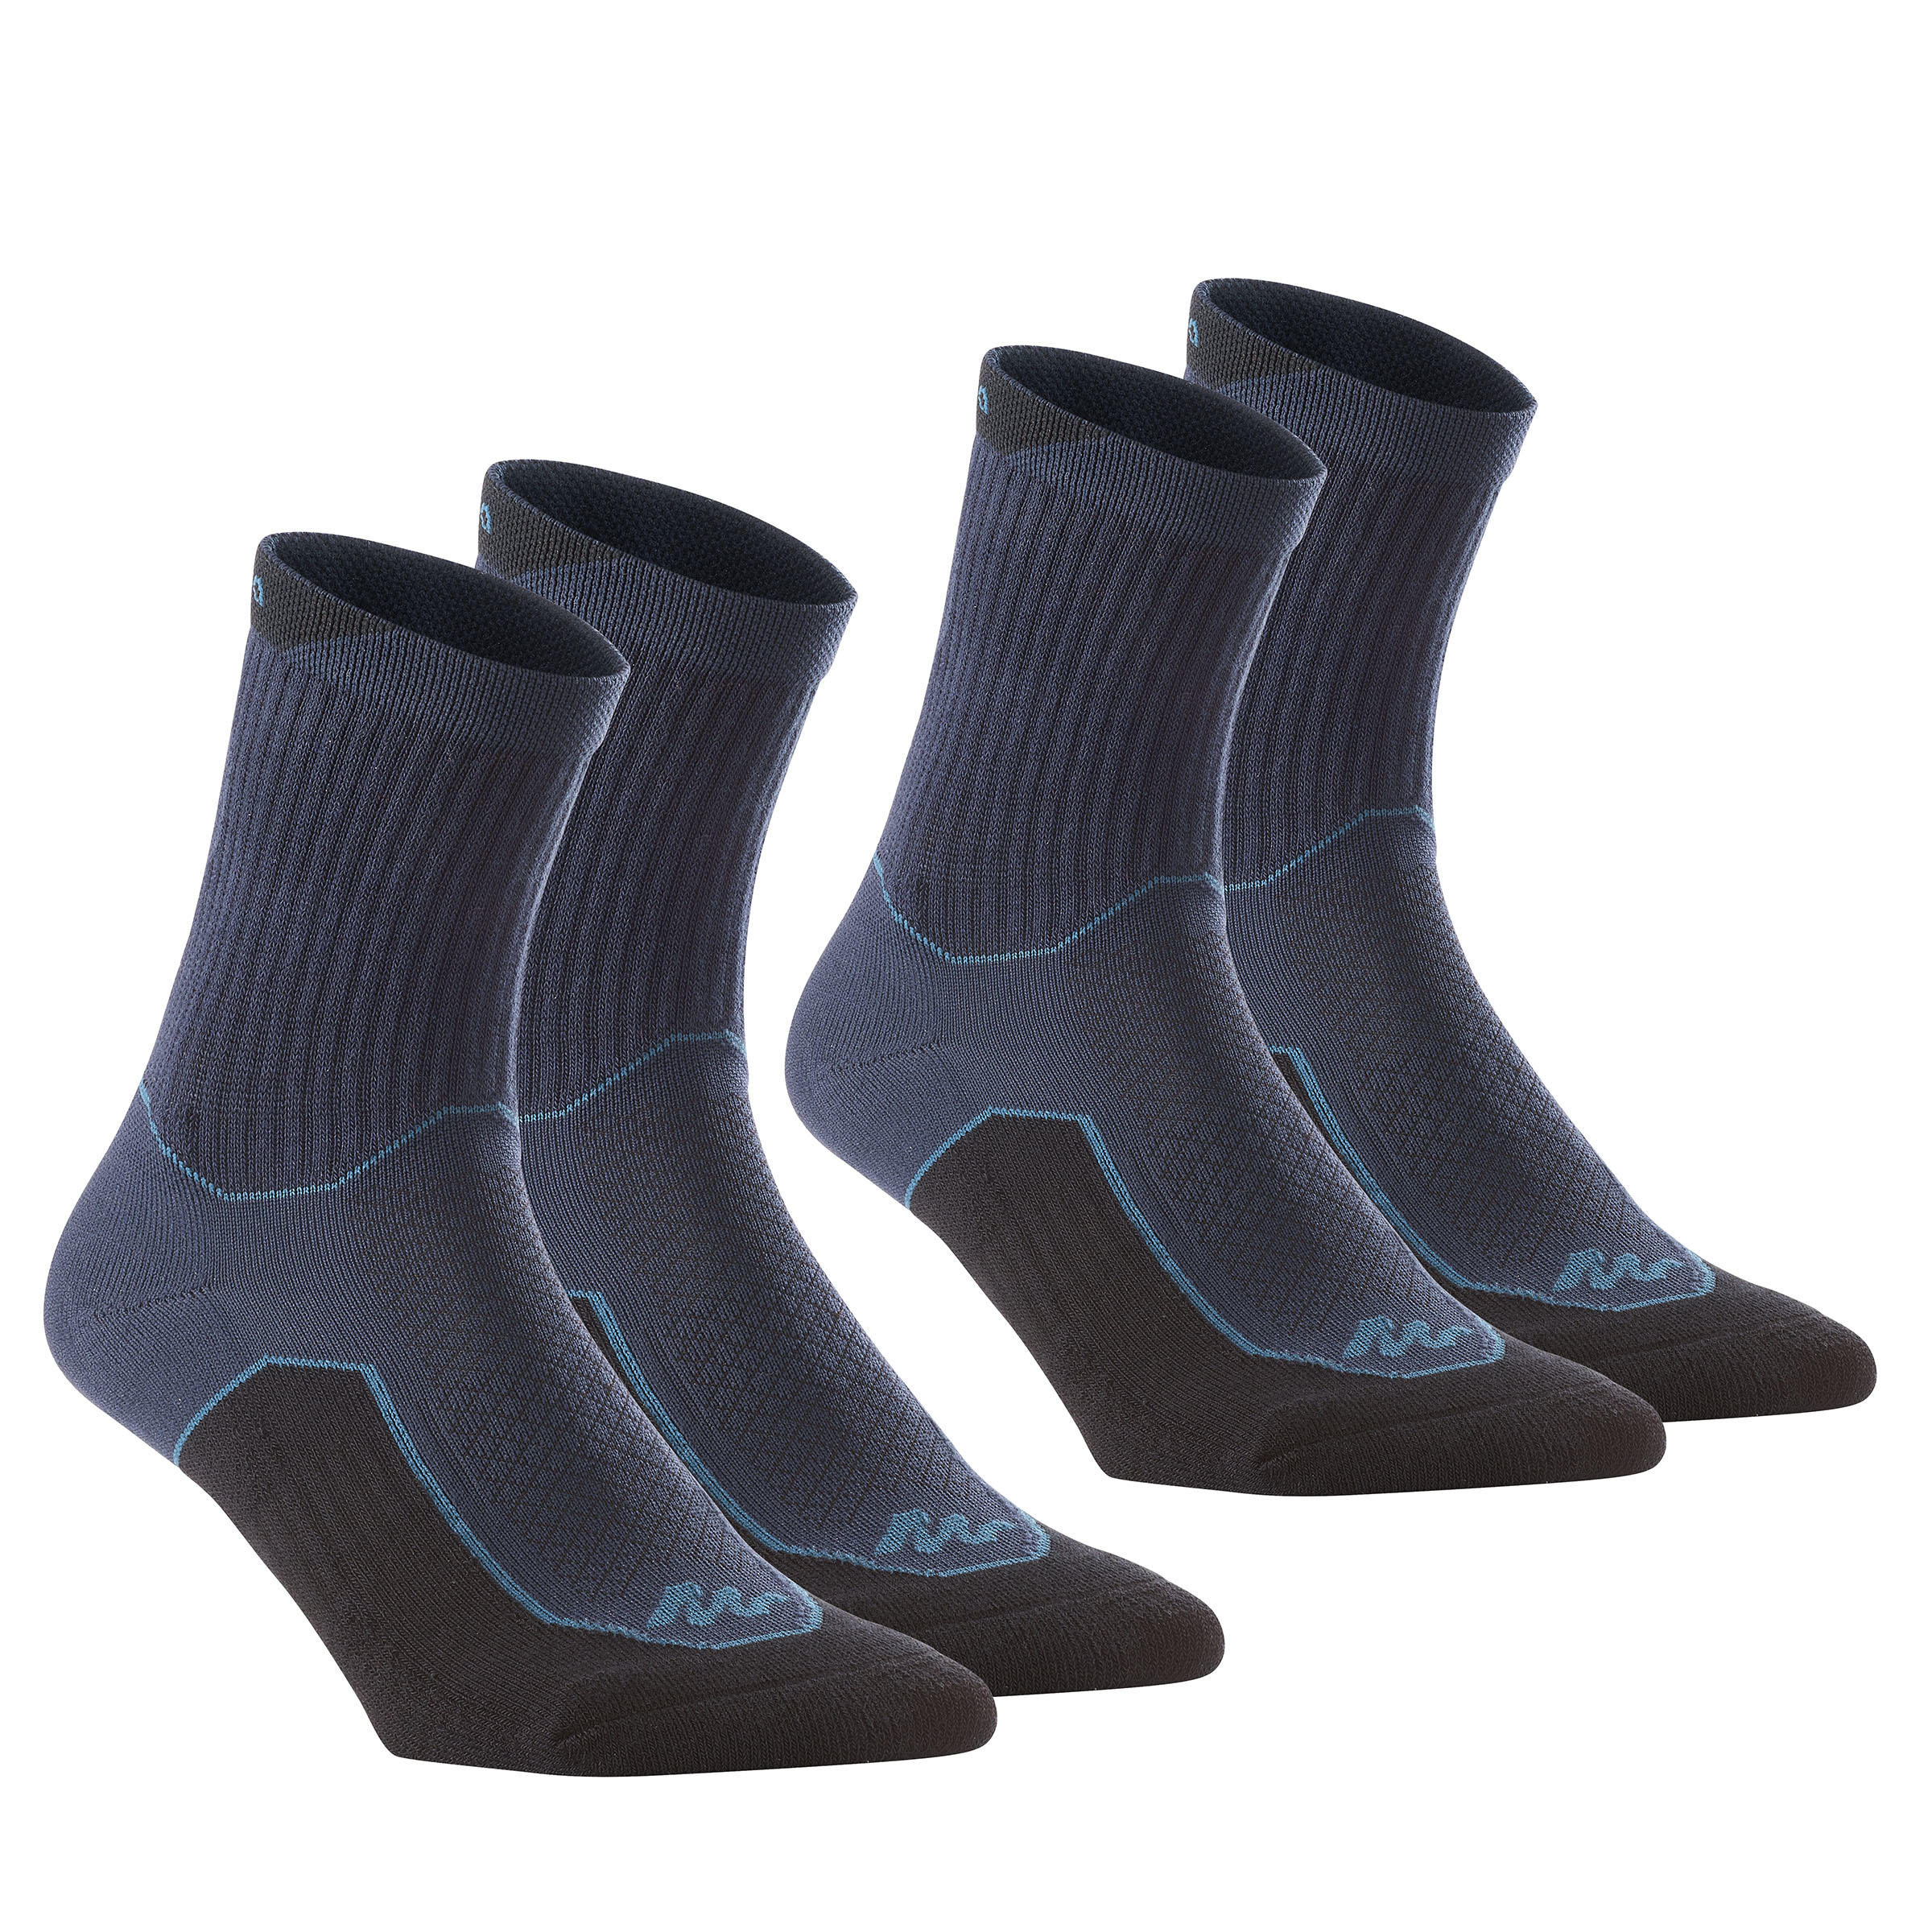 2 Pairs of Navy Blue Cotton Coolmax Ladies walking Socks with Arch Support 